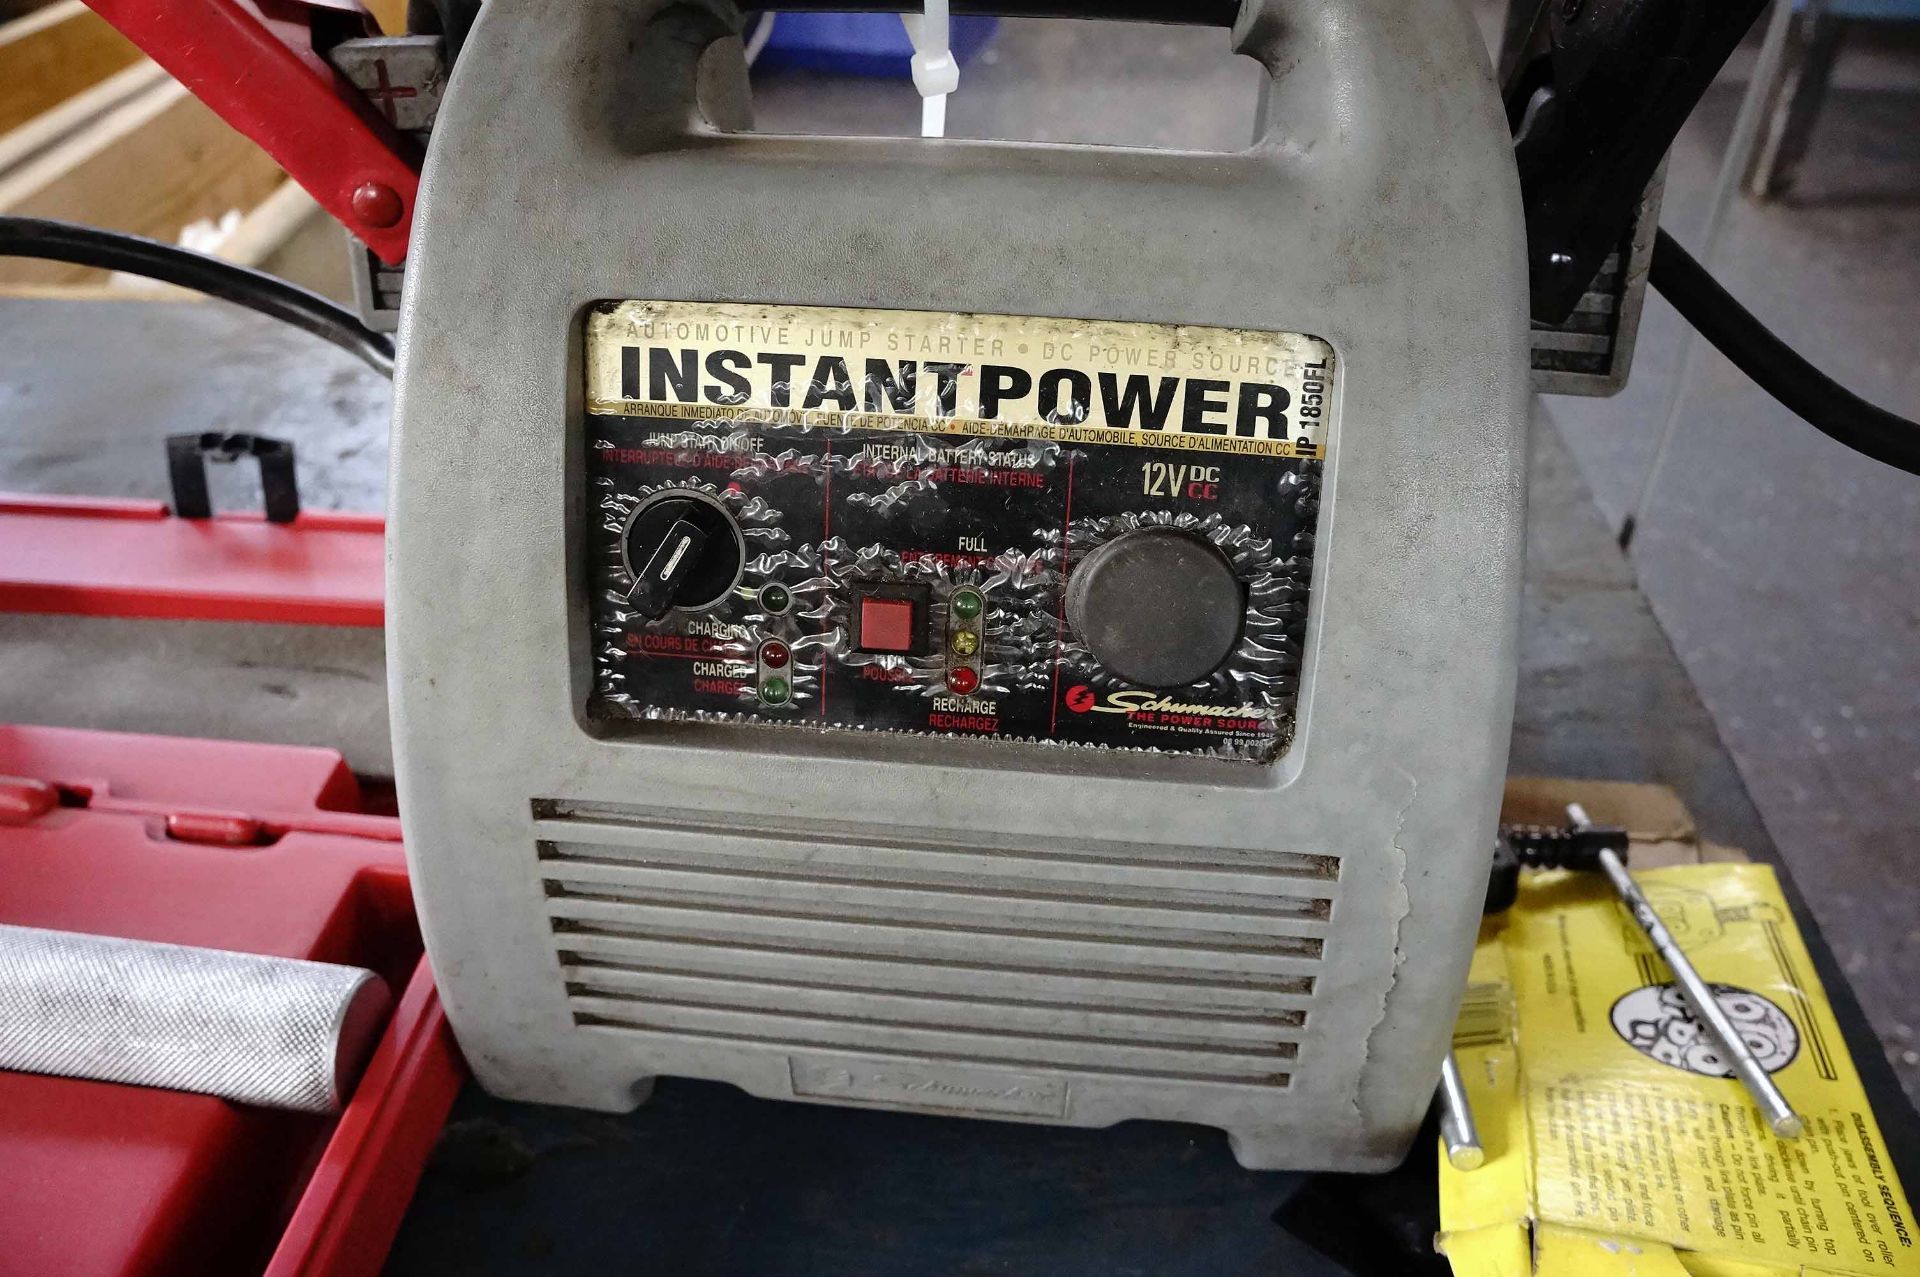 LOT CONSISTING OF: Instapower unit, chain breaker & Westward H.D. spanner - Image 3 of 4